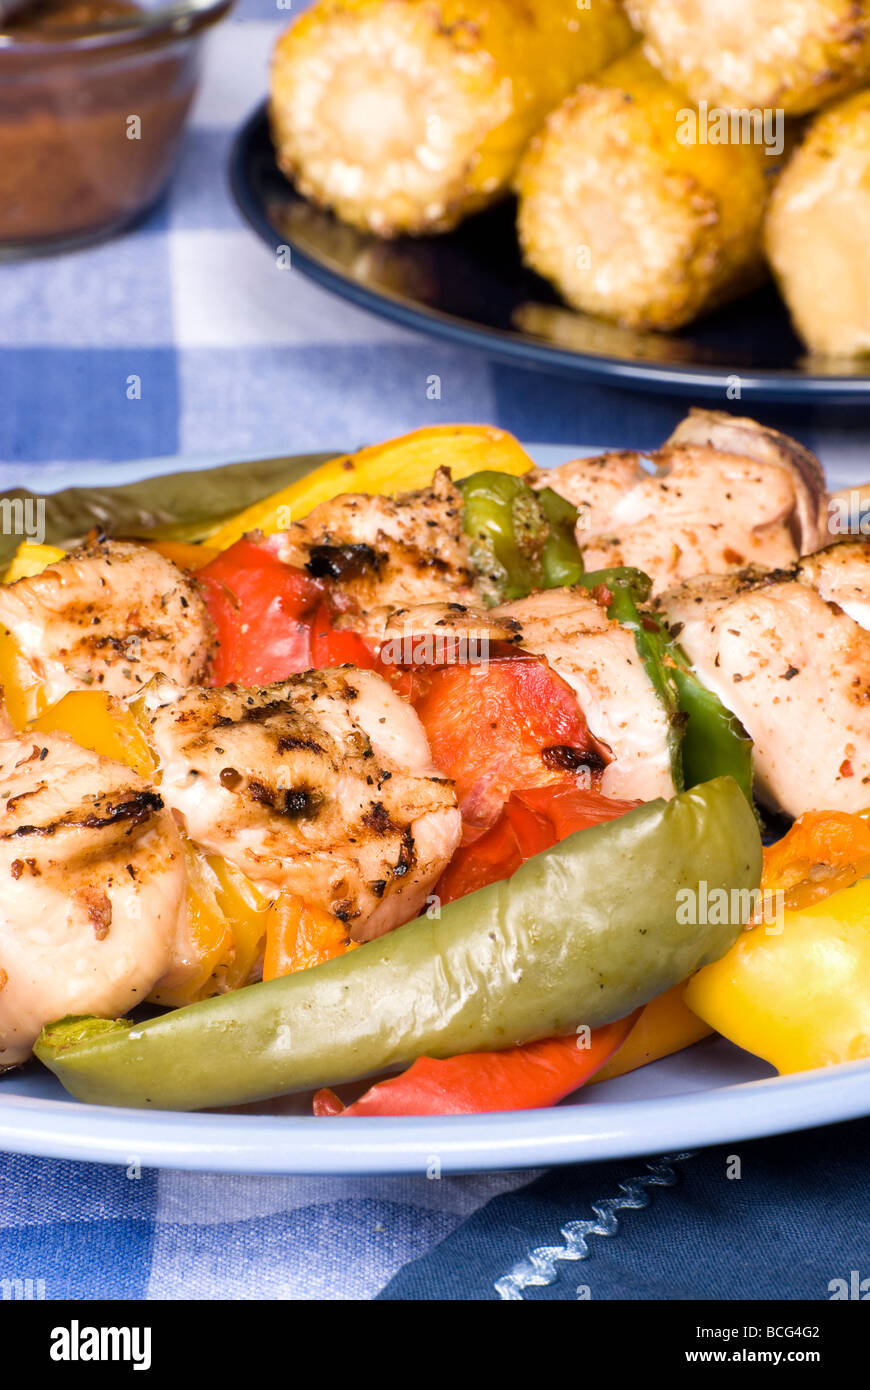 A barbecued chicken kebab dinner with corn on the cob on a picnic table setting Stock Photo